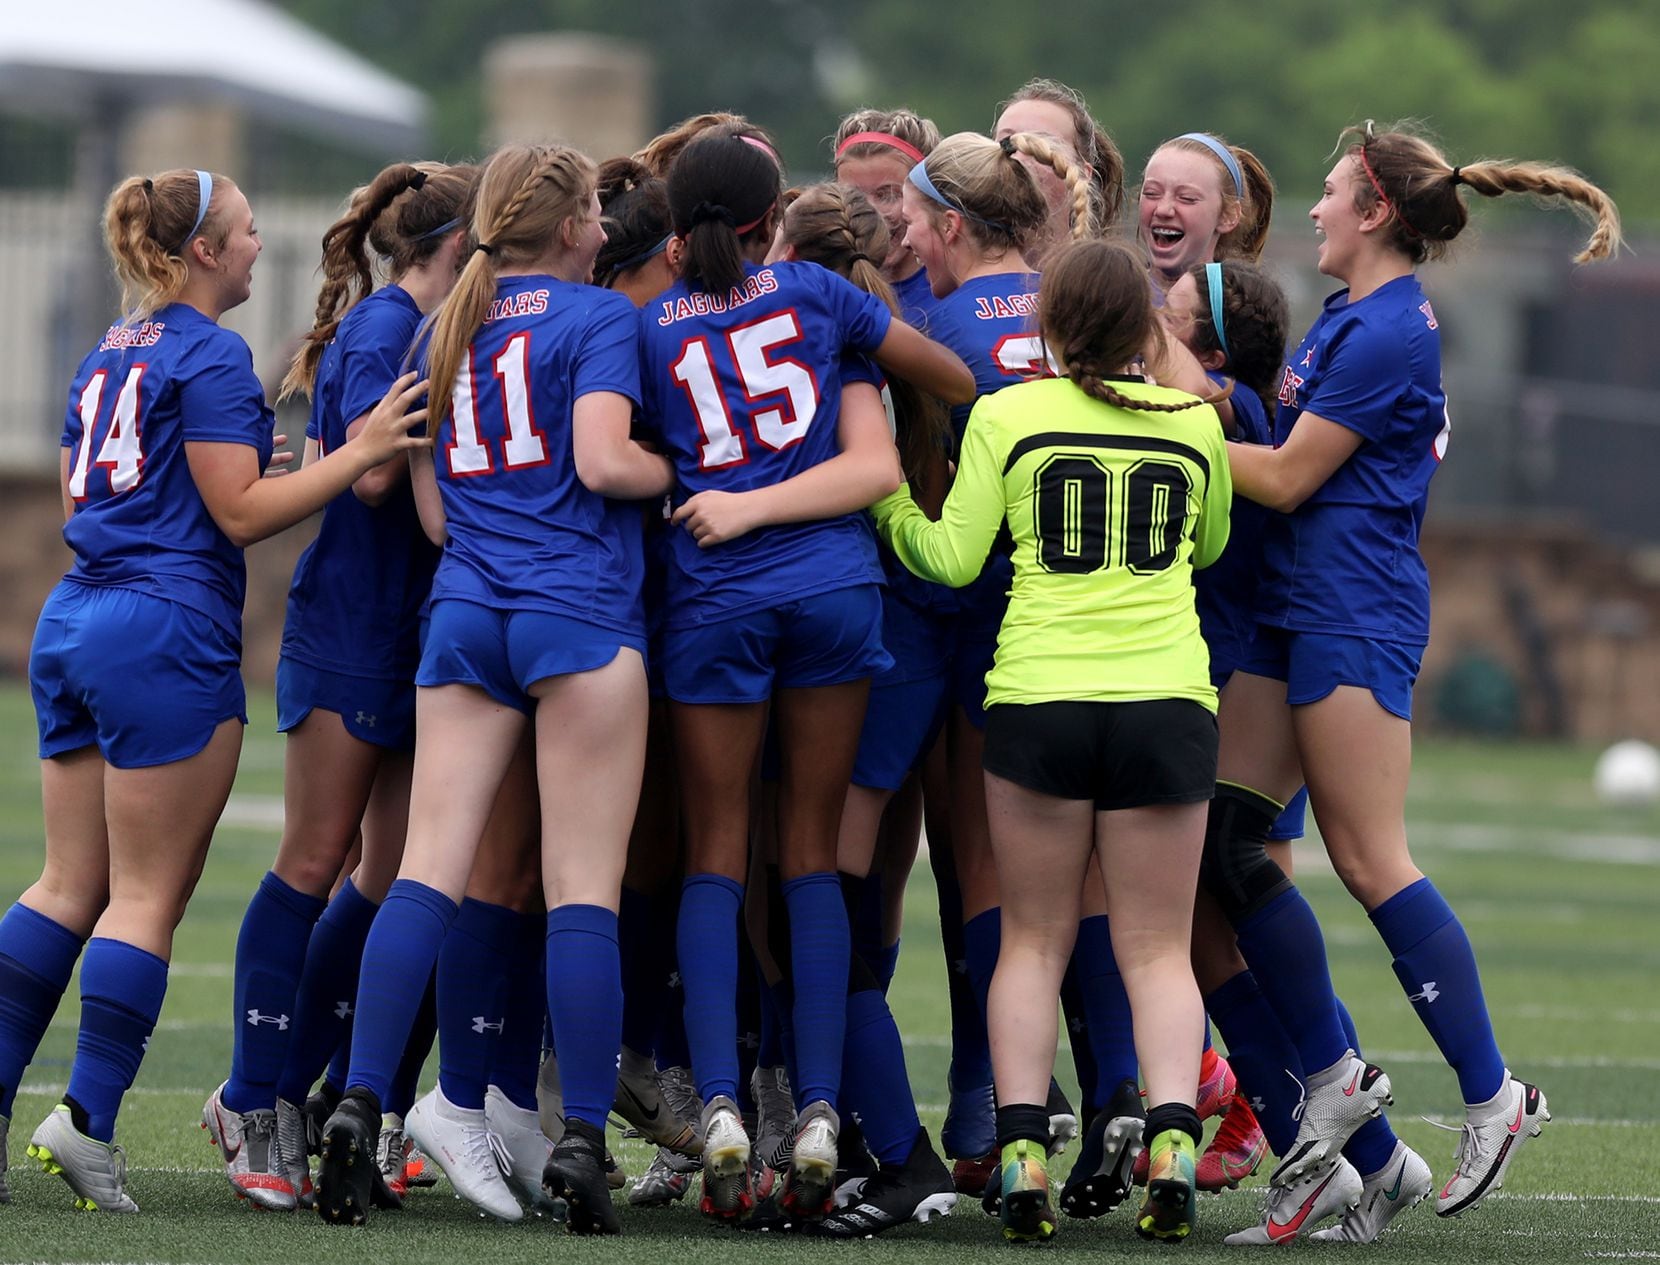 2021 UIL girls and boys state soccer championship central Previews and recaps for 6A, 5A and 4A